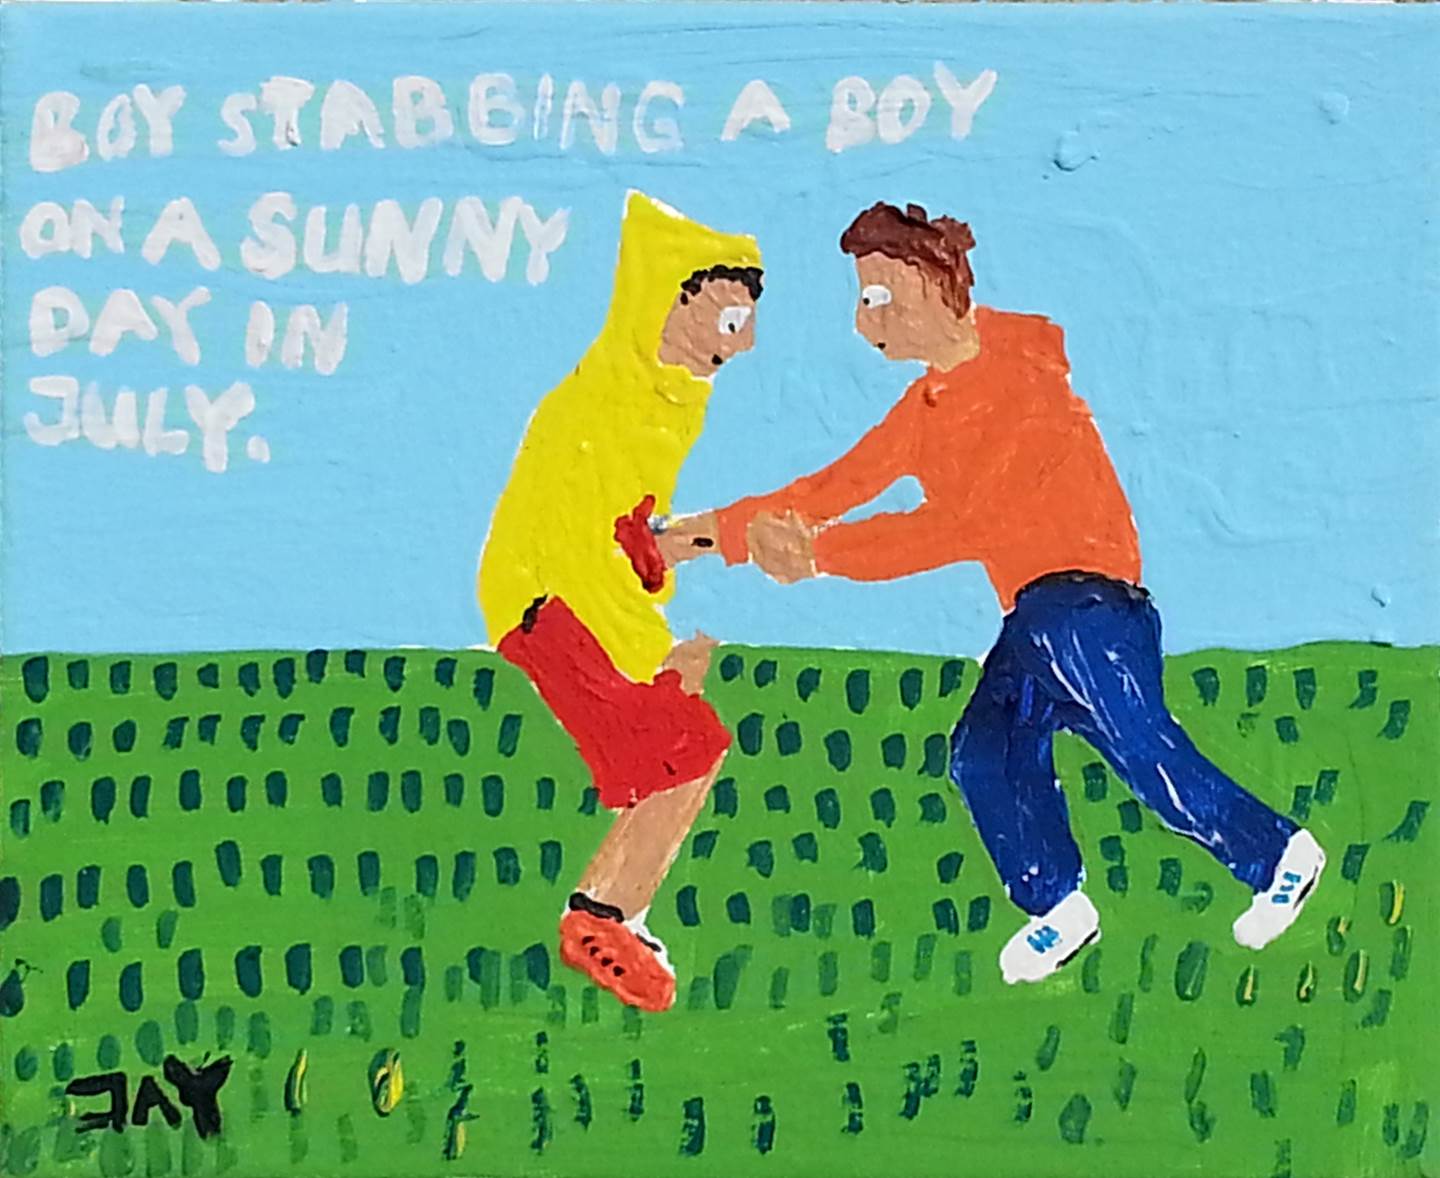 Bad Painting number 05: Boy stabbing a boy on a sunny day in July, original Figura humana Acrílico Pintura de Jay Rechsteiner